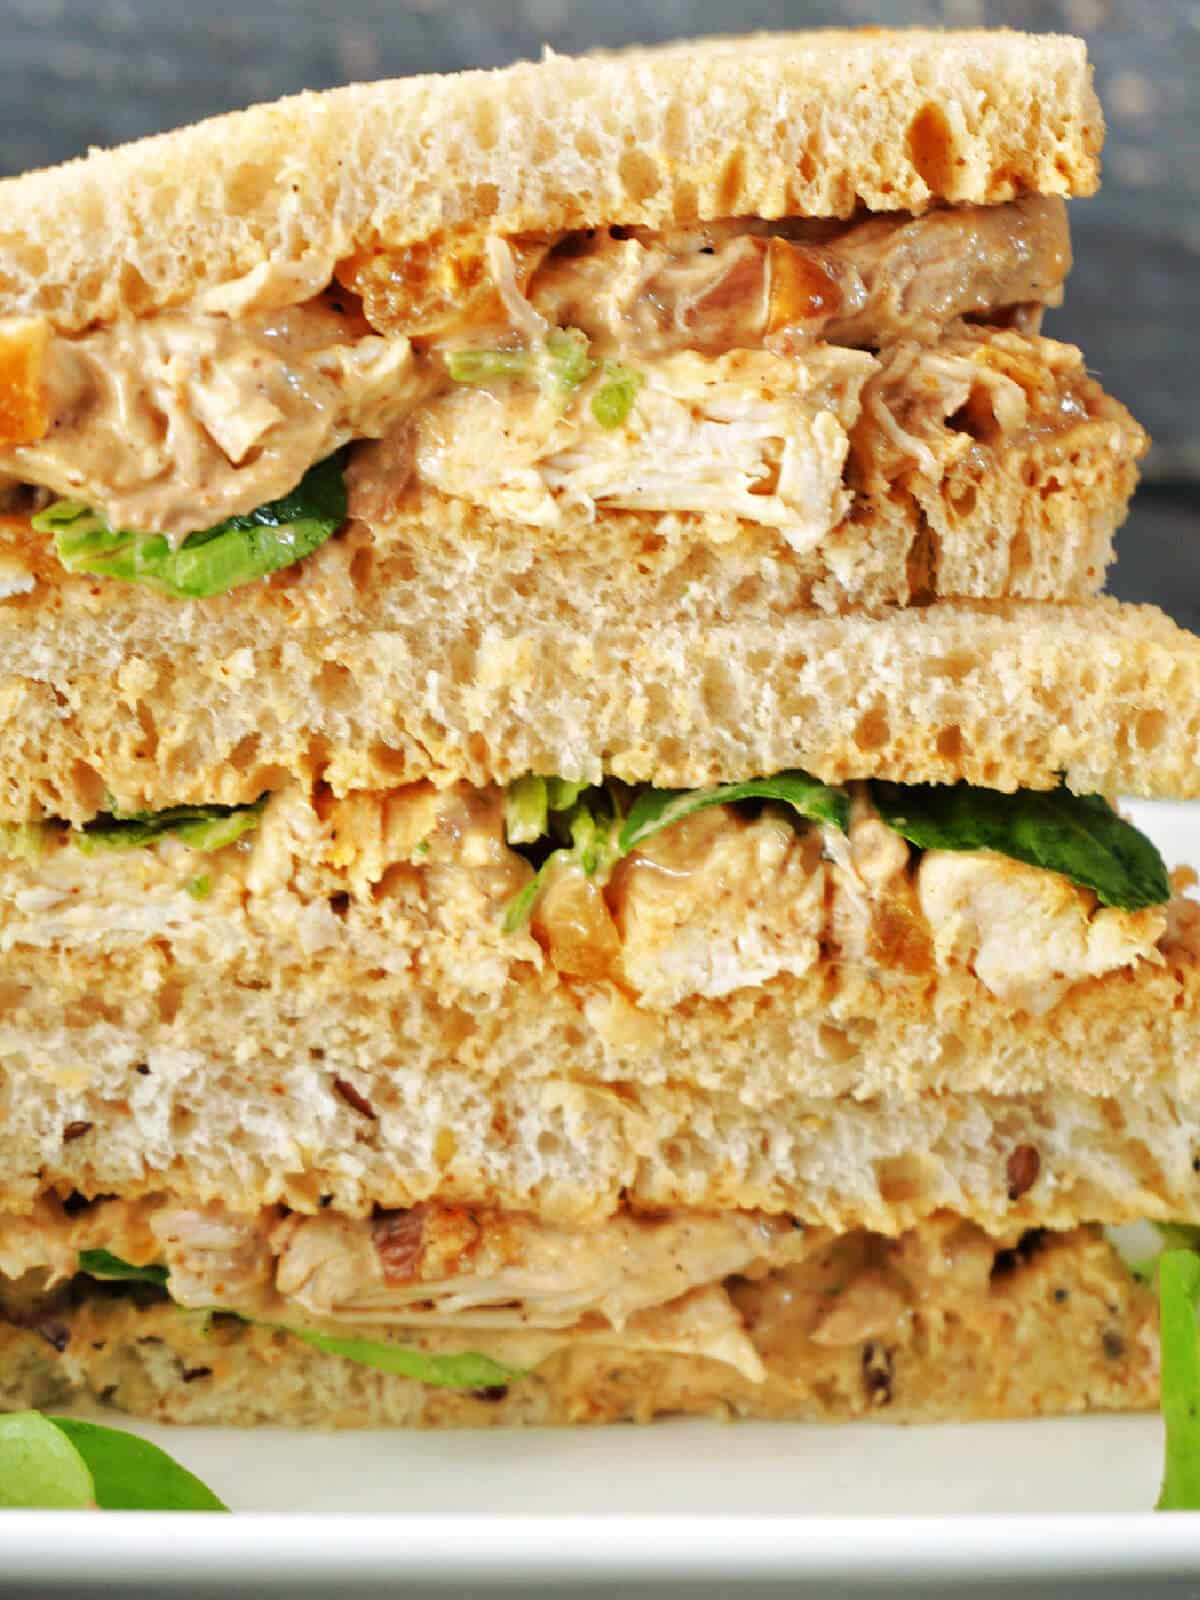 A stack of coronation chicken sandwiches.